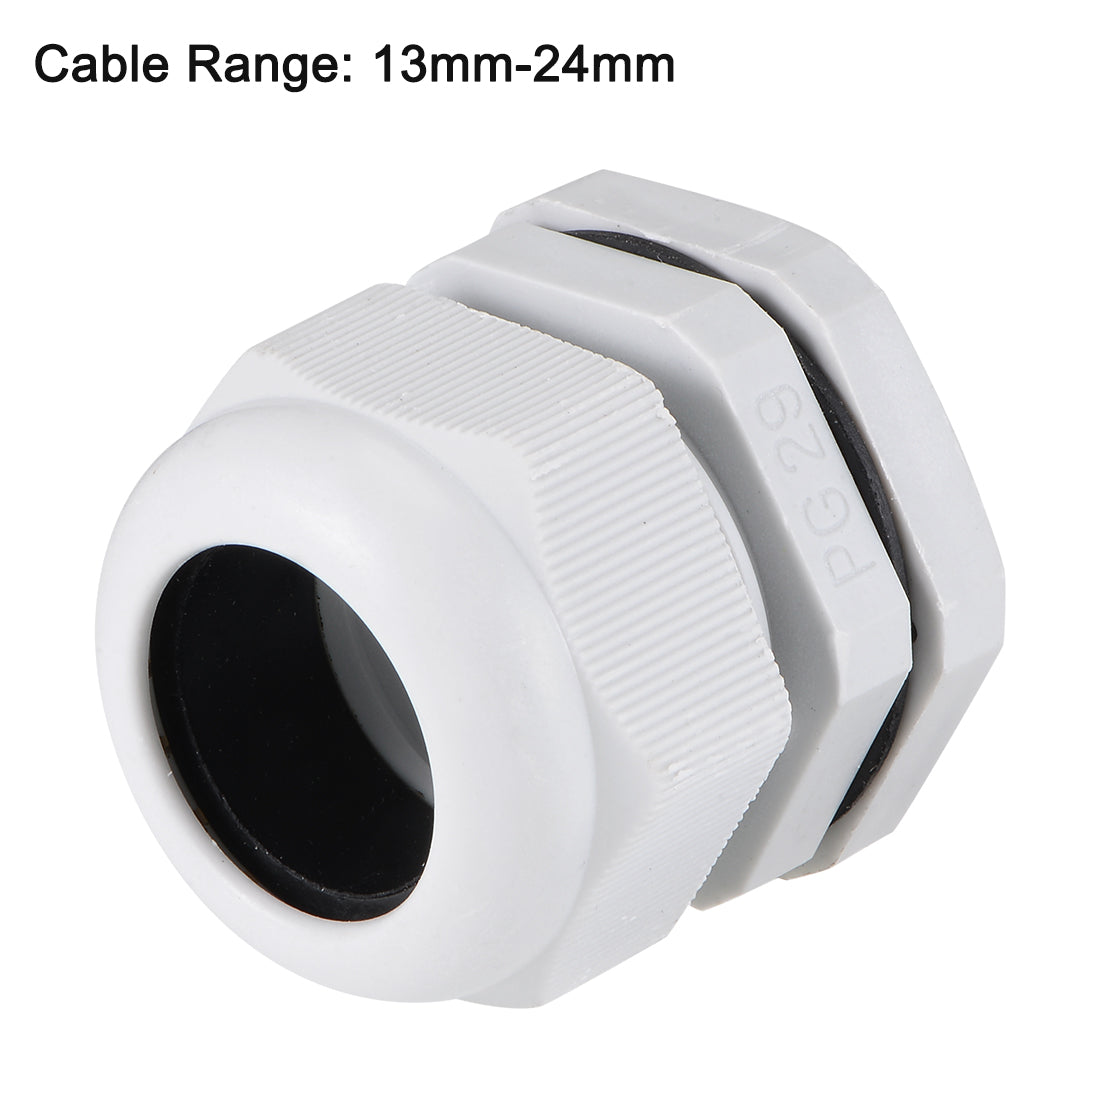 uxcell Uxcell PG29 Cable Gland 13mm-24mm Wire Hole Waterproof Nylon Joint Adjustable Locknut with Washer White 10pcs